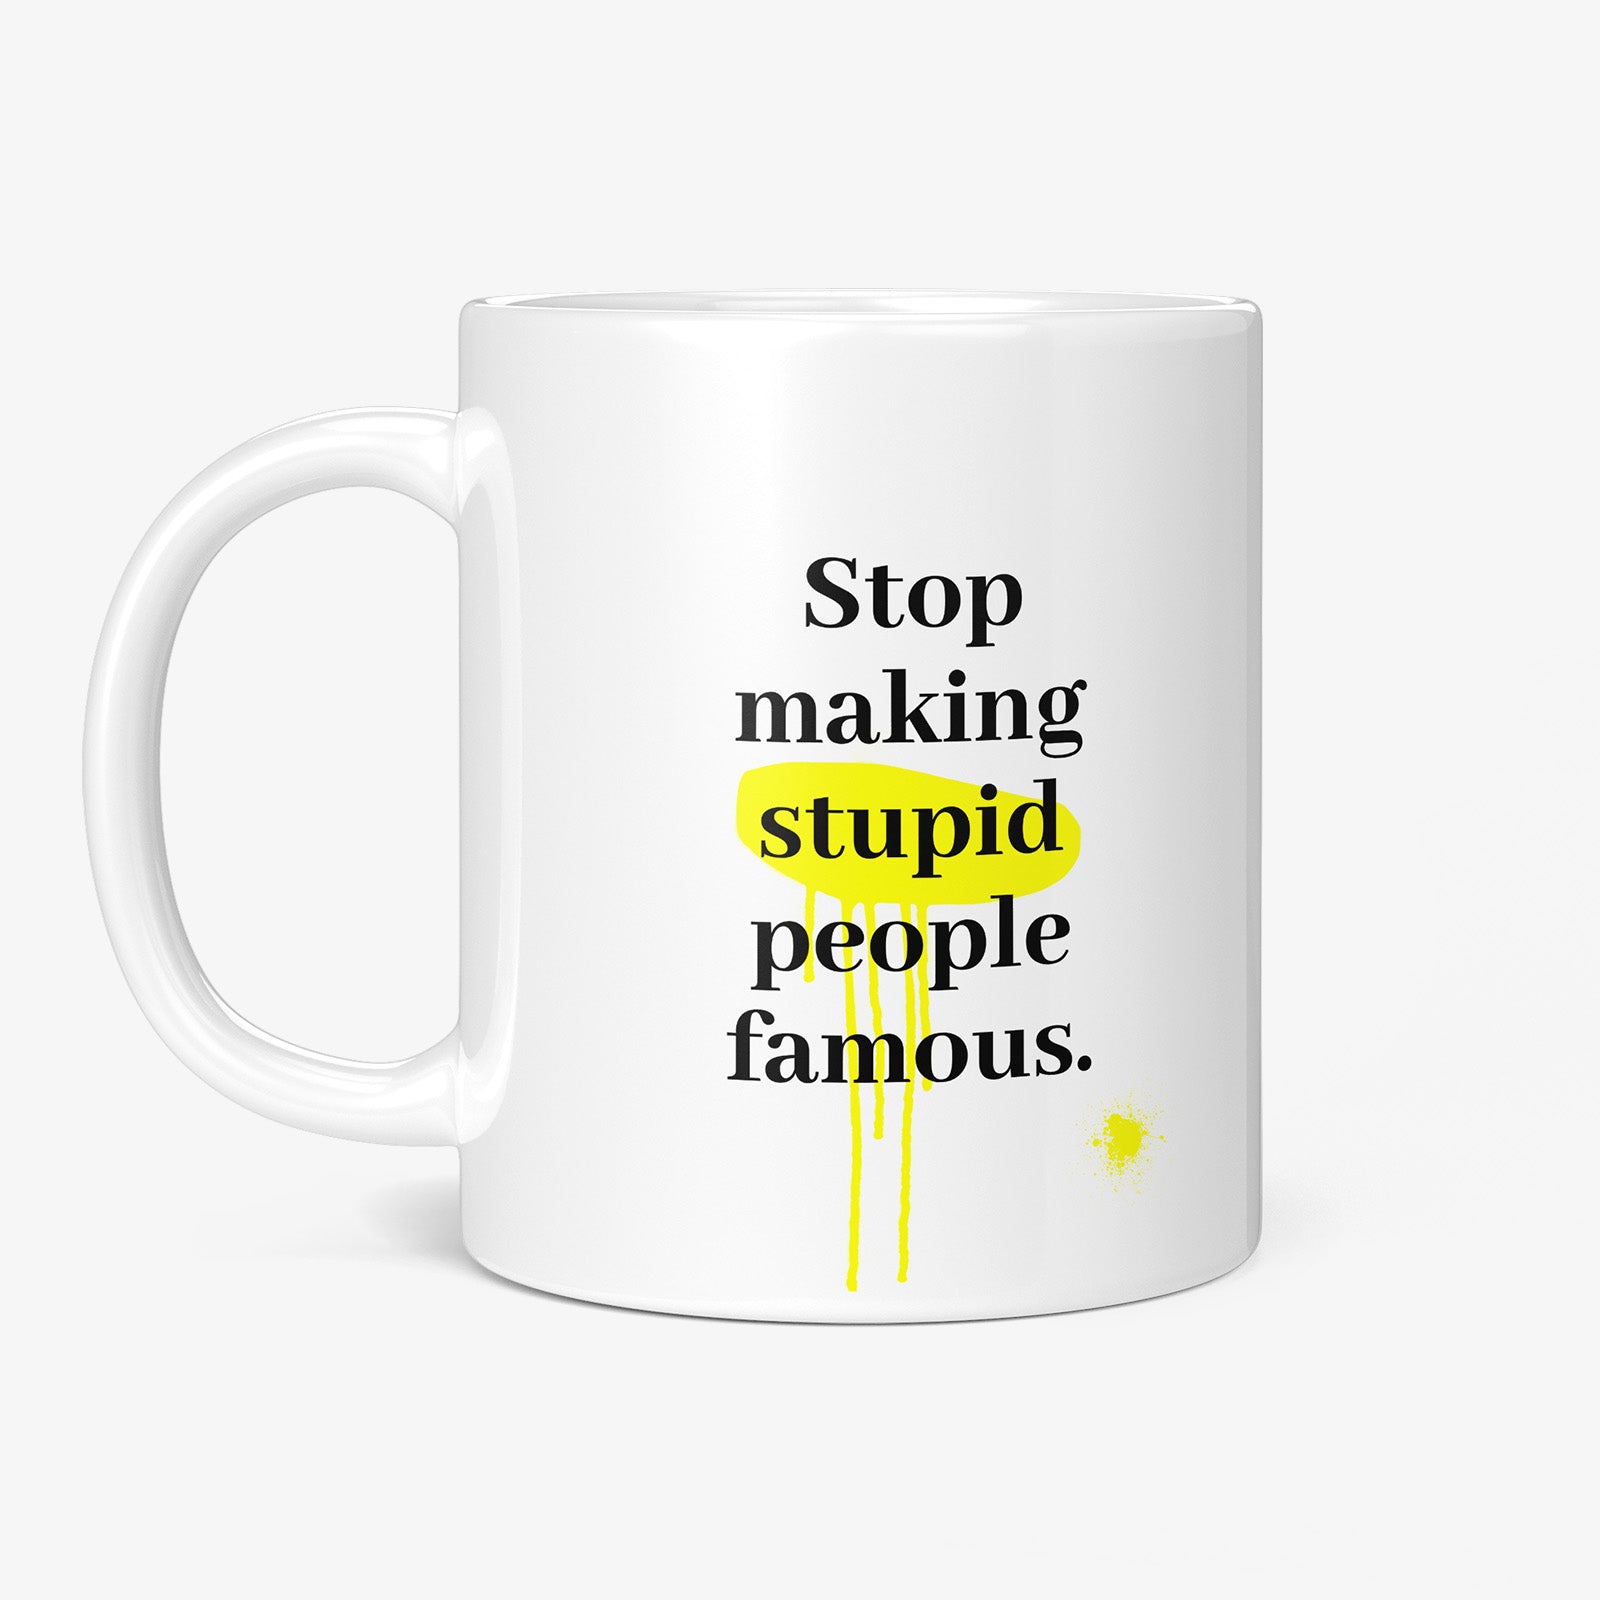 Get inspired by the quote, "Stop Making Stupid People Famous" on this 11oz white glossy coffee mug with the handle on the left.